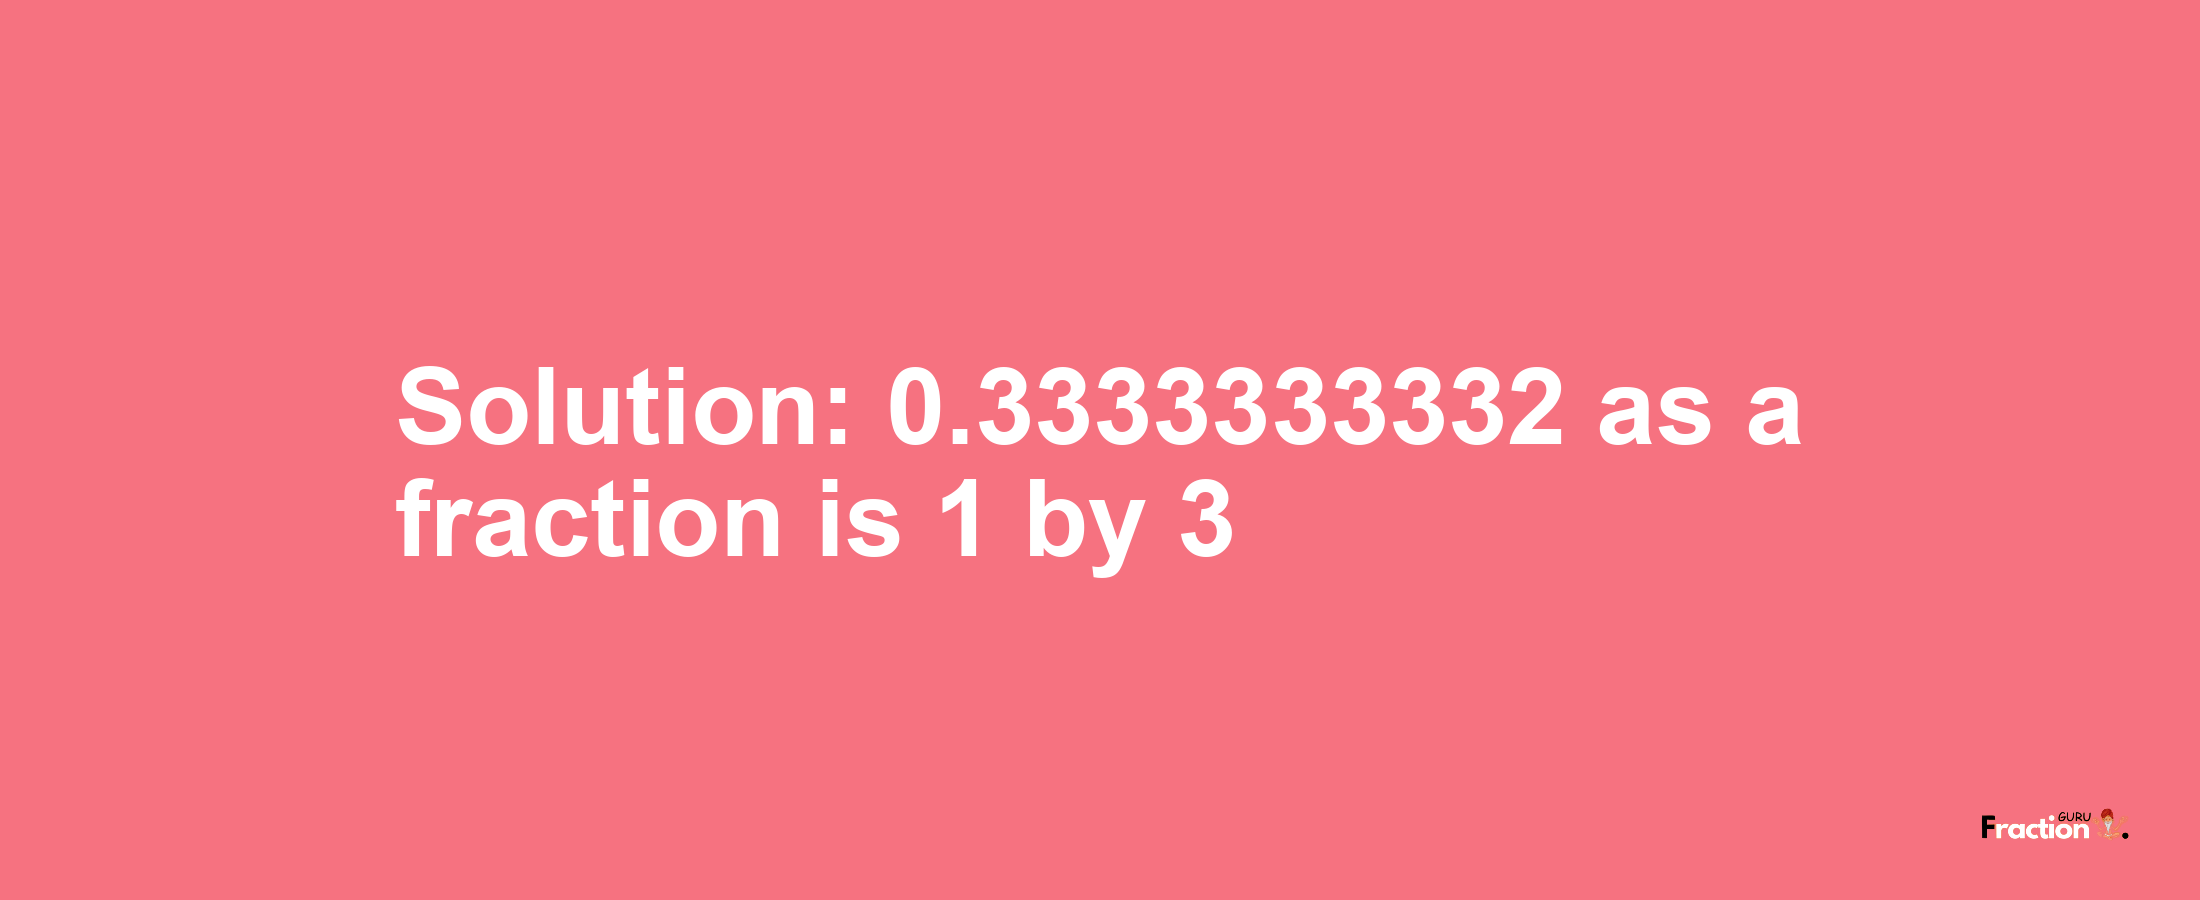 Solution:0.3333333332 as a fraction is 1/3